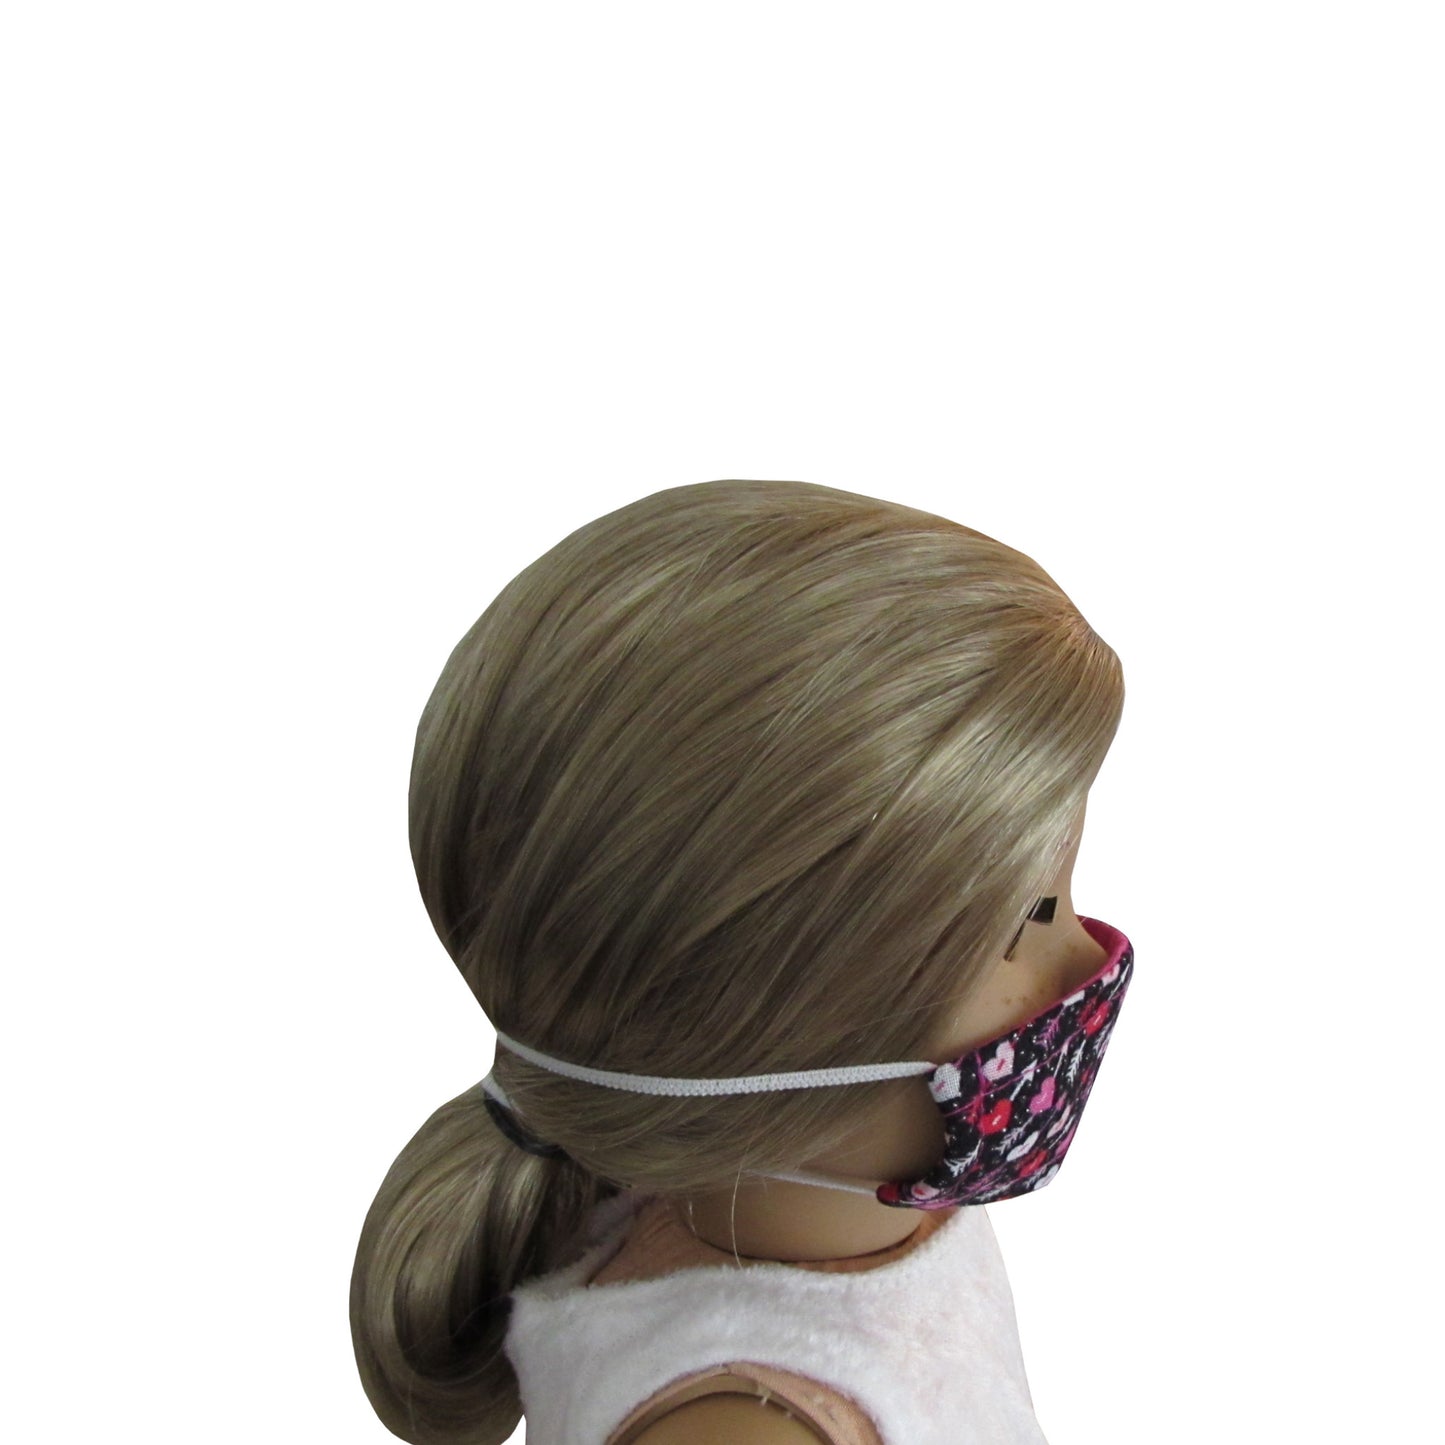 Hearts with Arrows on Black Print Doll Face Mask for 18-inch dolls with American Girl doll Side